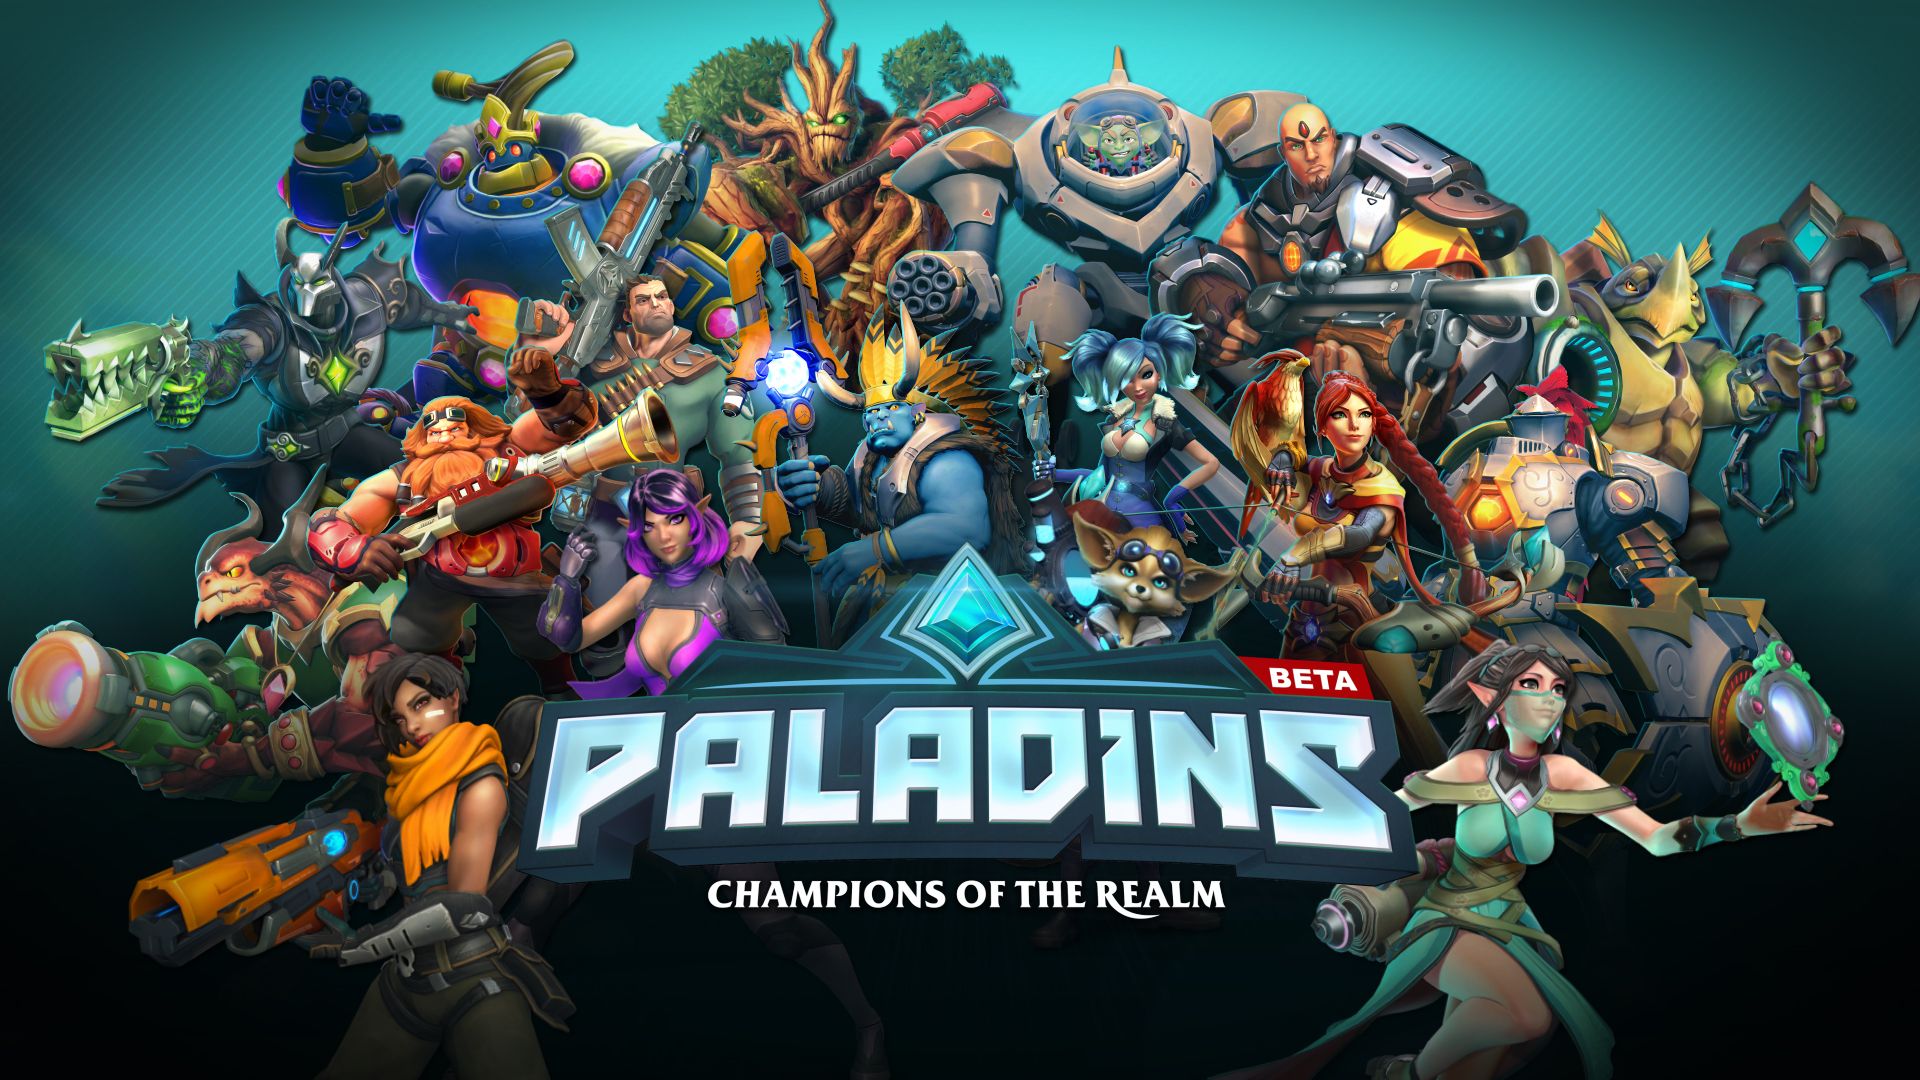 Steam Workshop - Paladins Champions of the Realm